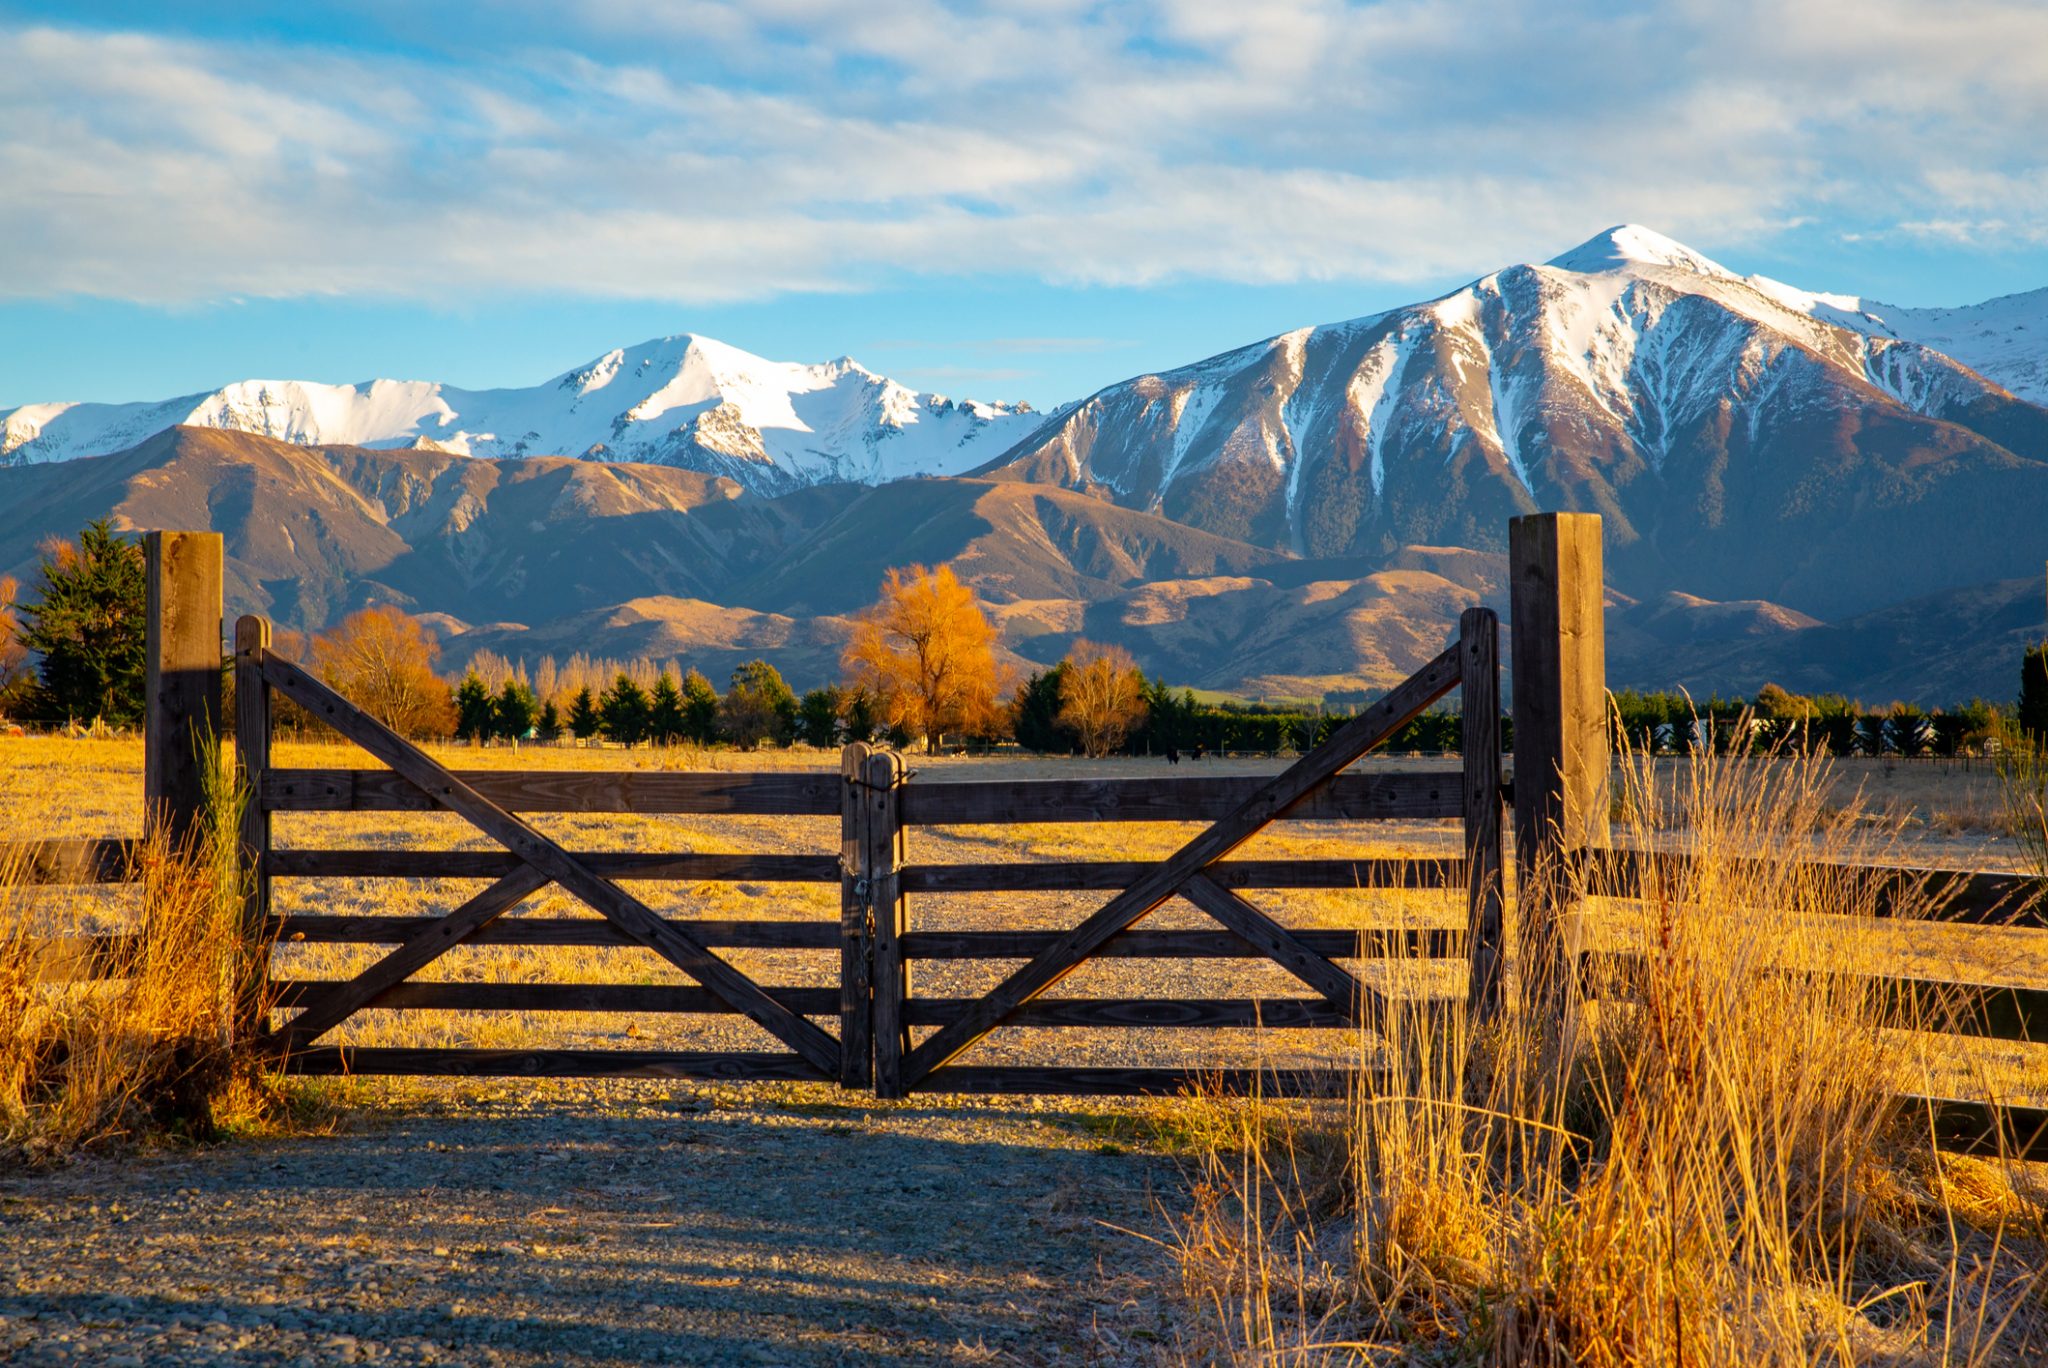 Picturesque snowy mountains behind a wooden farm gate.